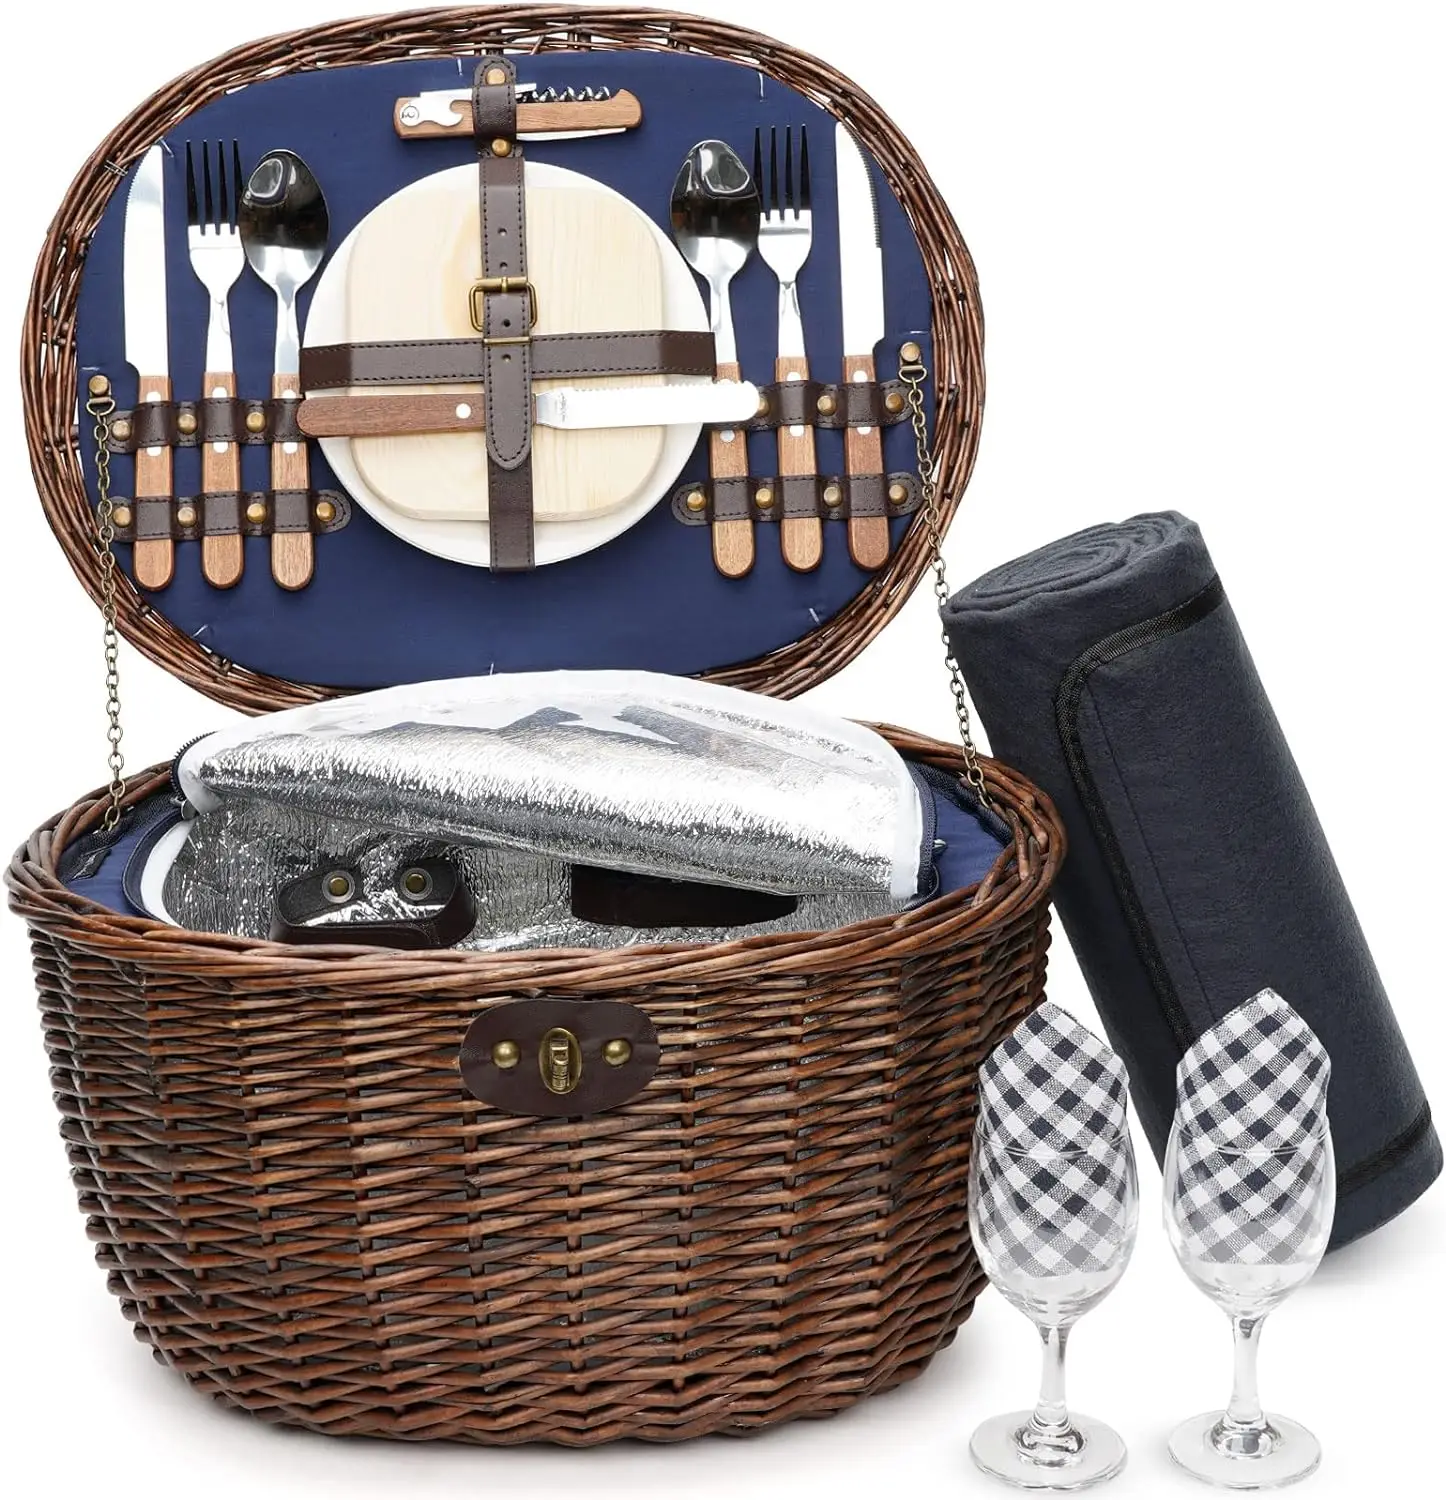 

Willow Picnic Basket for 2 Persons, Natural Wicker Picnic Hamper with Service Set and Insulated Cooler Bag - Best Gifts for Fath